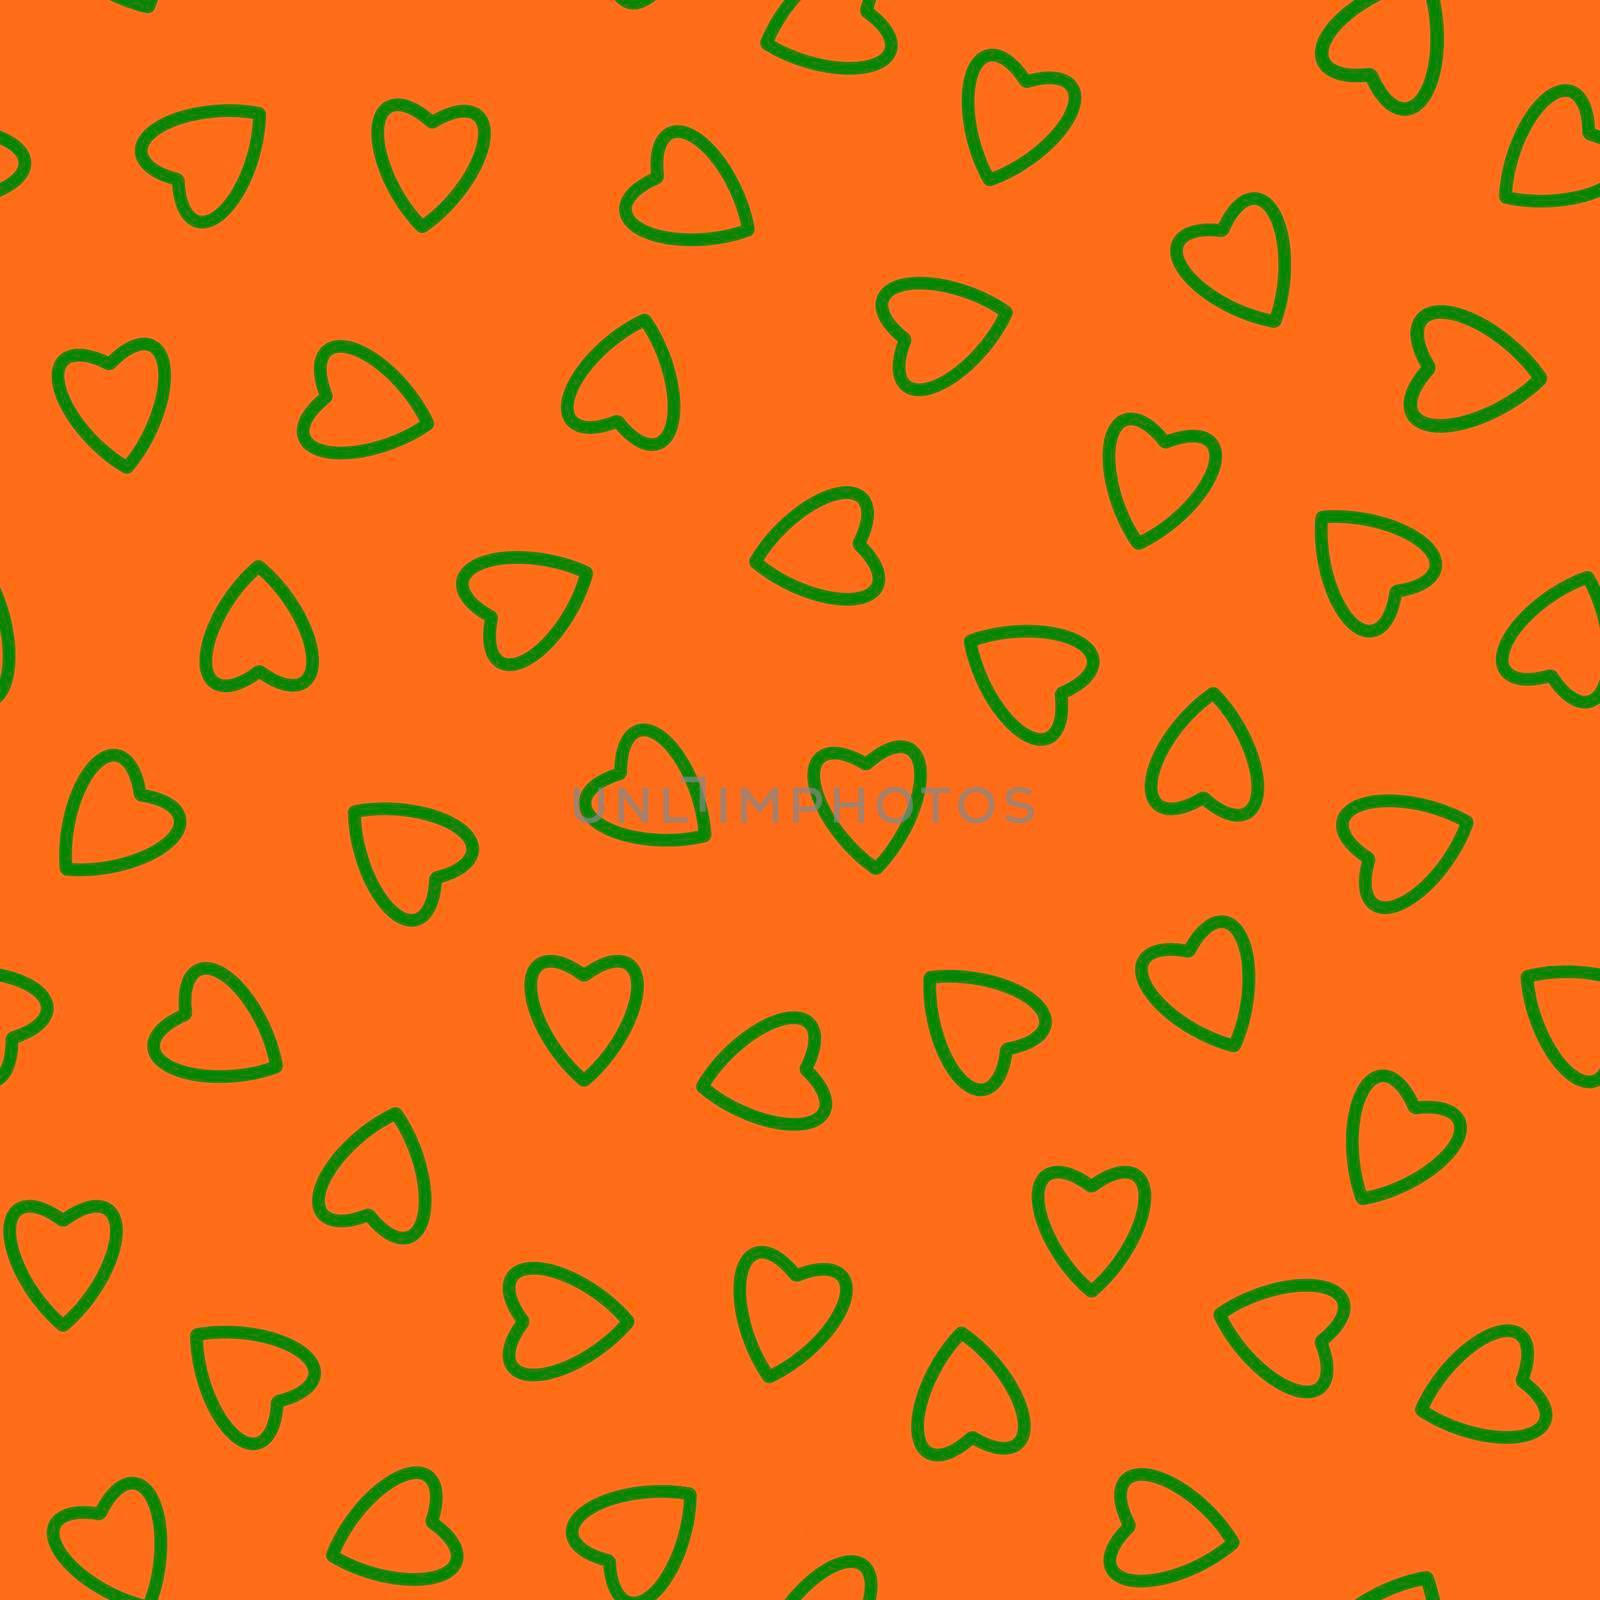 Simple hearts seamless pattern,endless chaotic texture made of tiny heart silhouettes.Valentines,mothers day background.Great for Easter,wedding,scrapbook,gift wrapping paper,textiles.Green on orange.